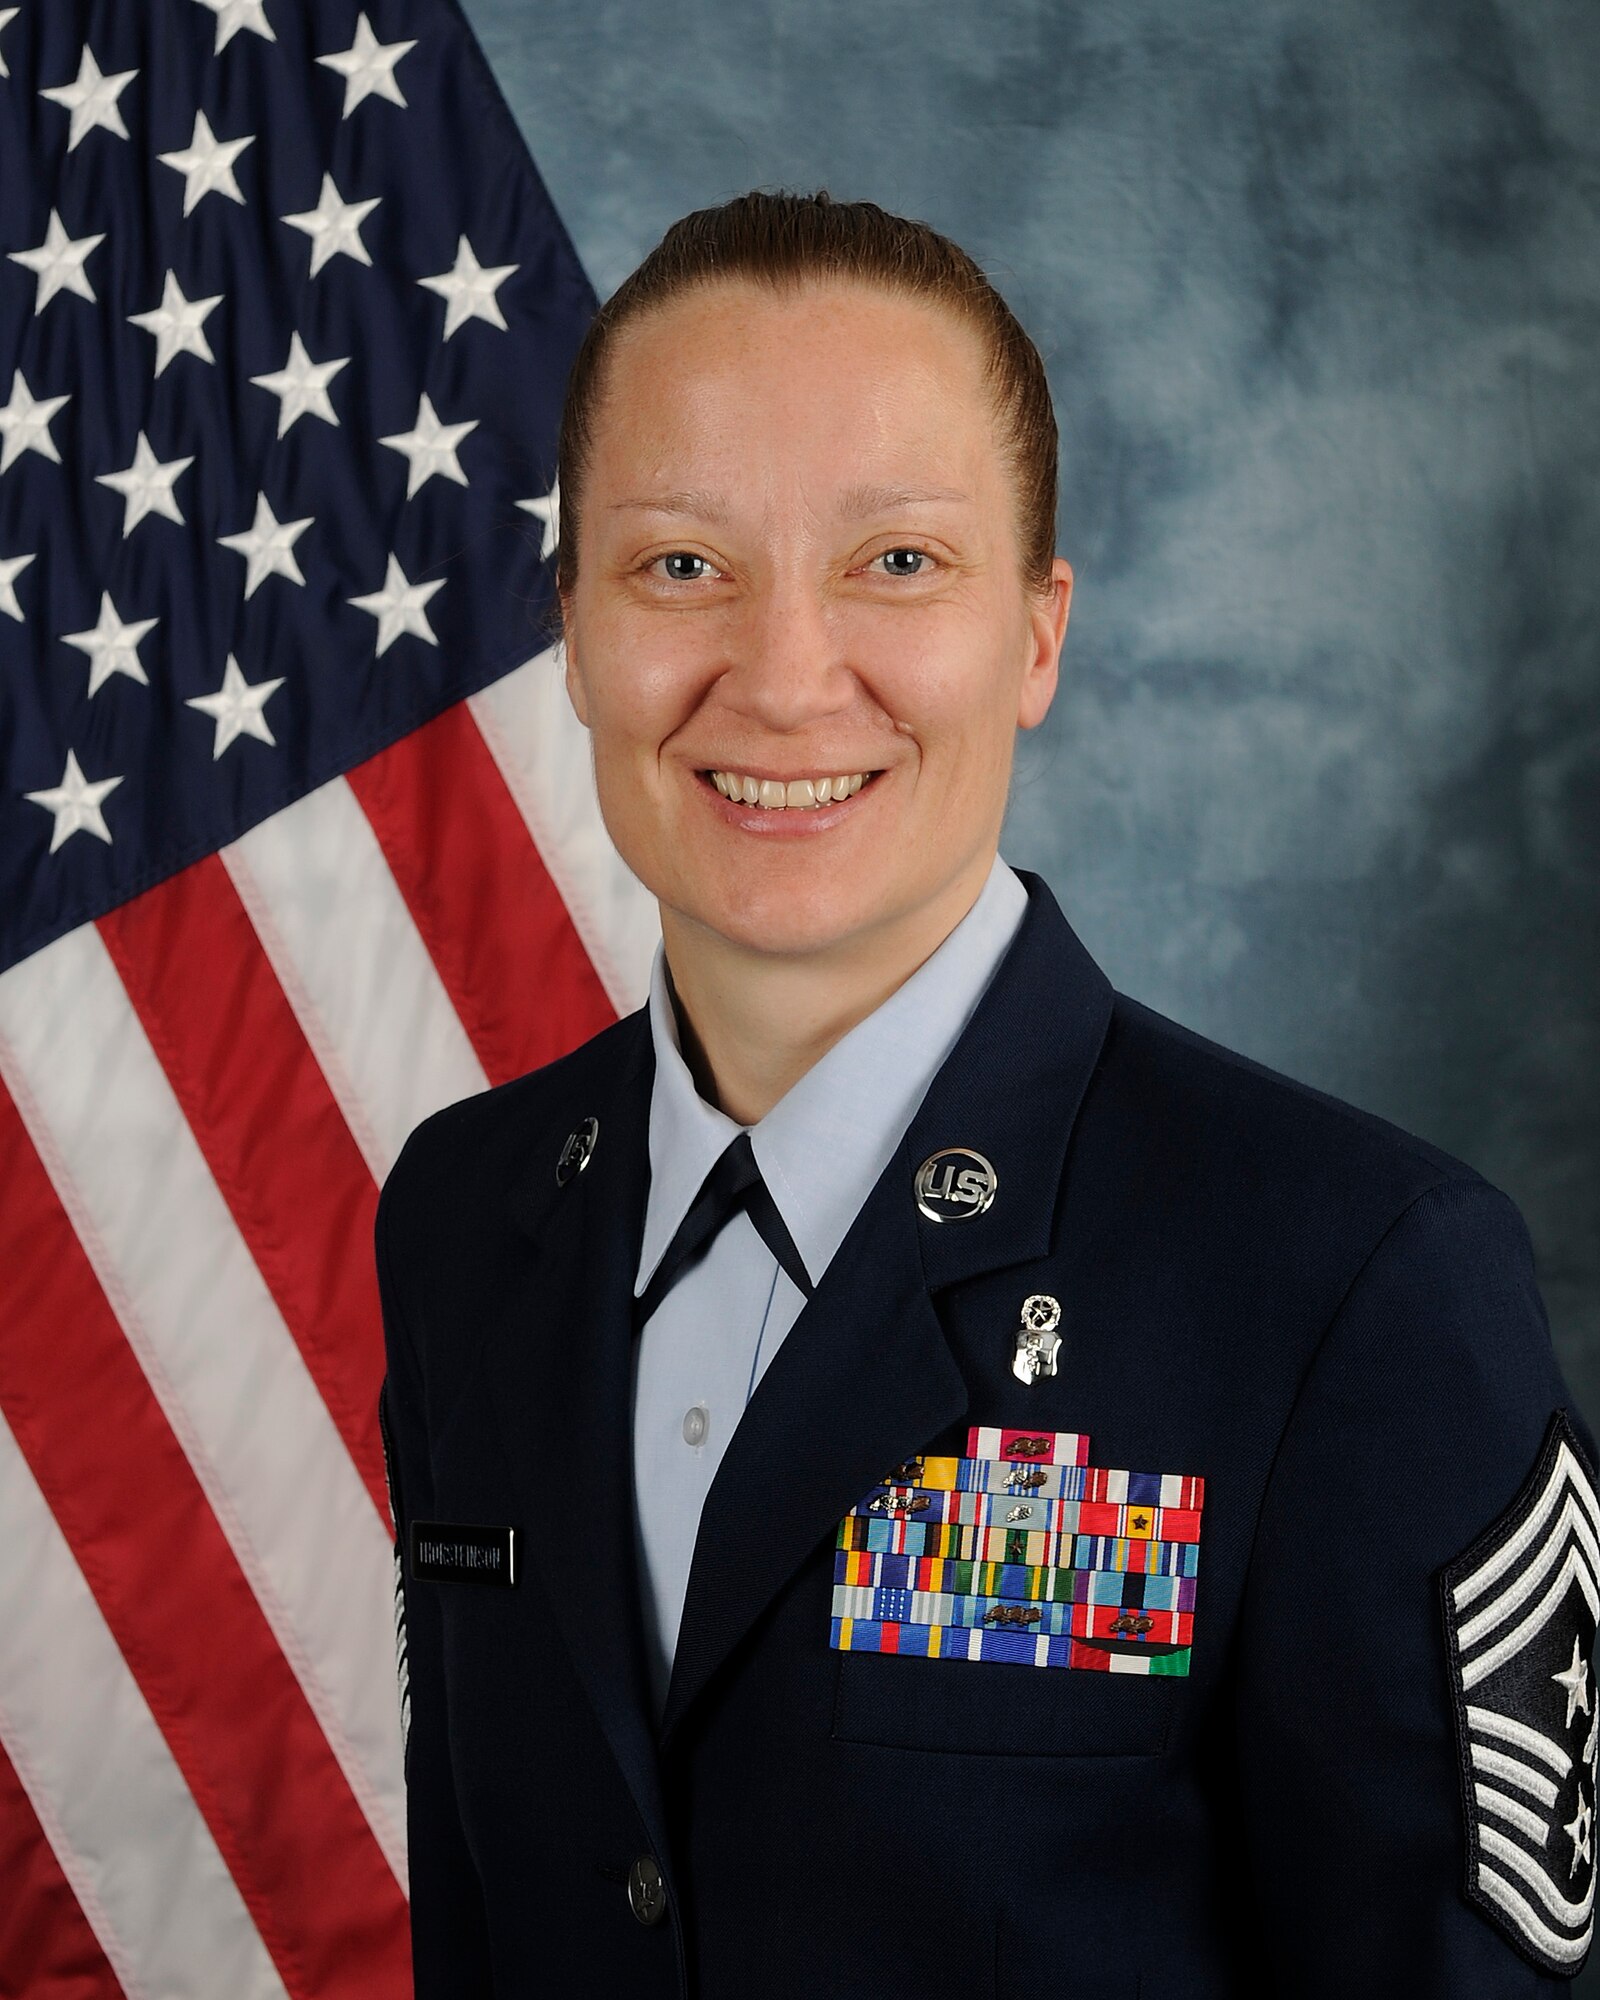 Chief Master Sgt. Michelle R. Thorsteinson-Richards, has been selected as the new Air Force Life Cycle Management Center's command chief.